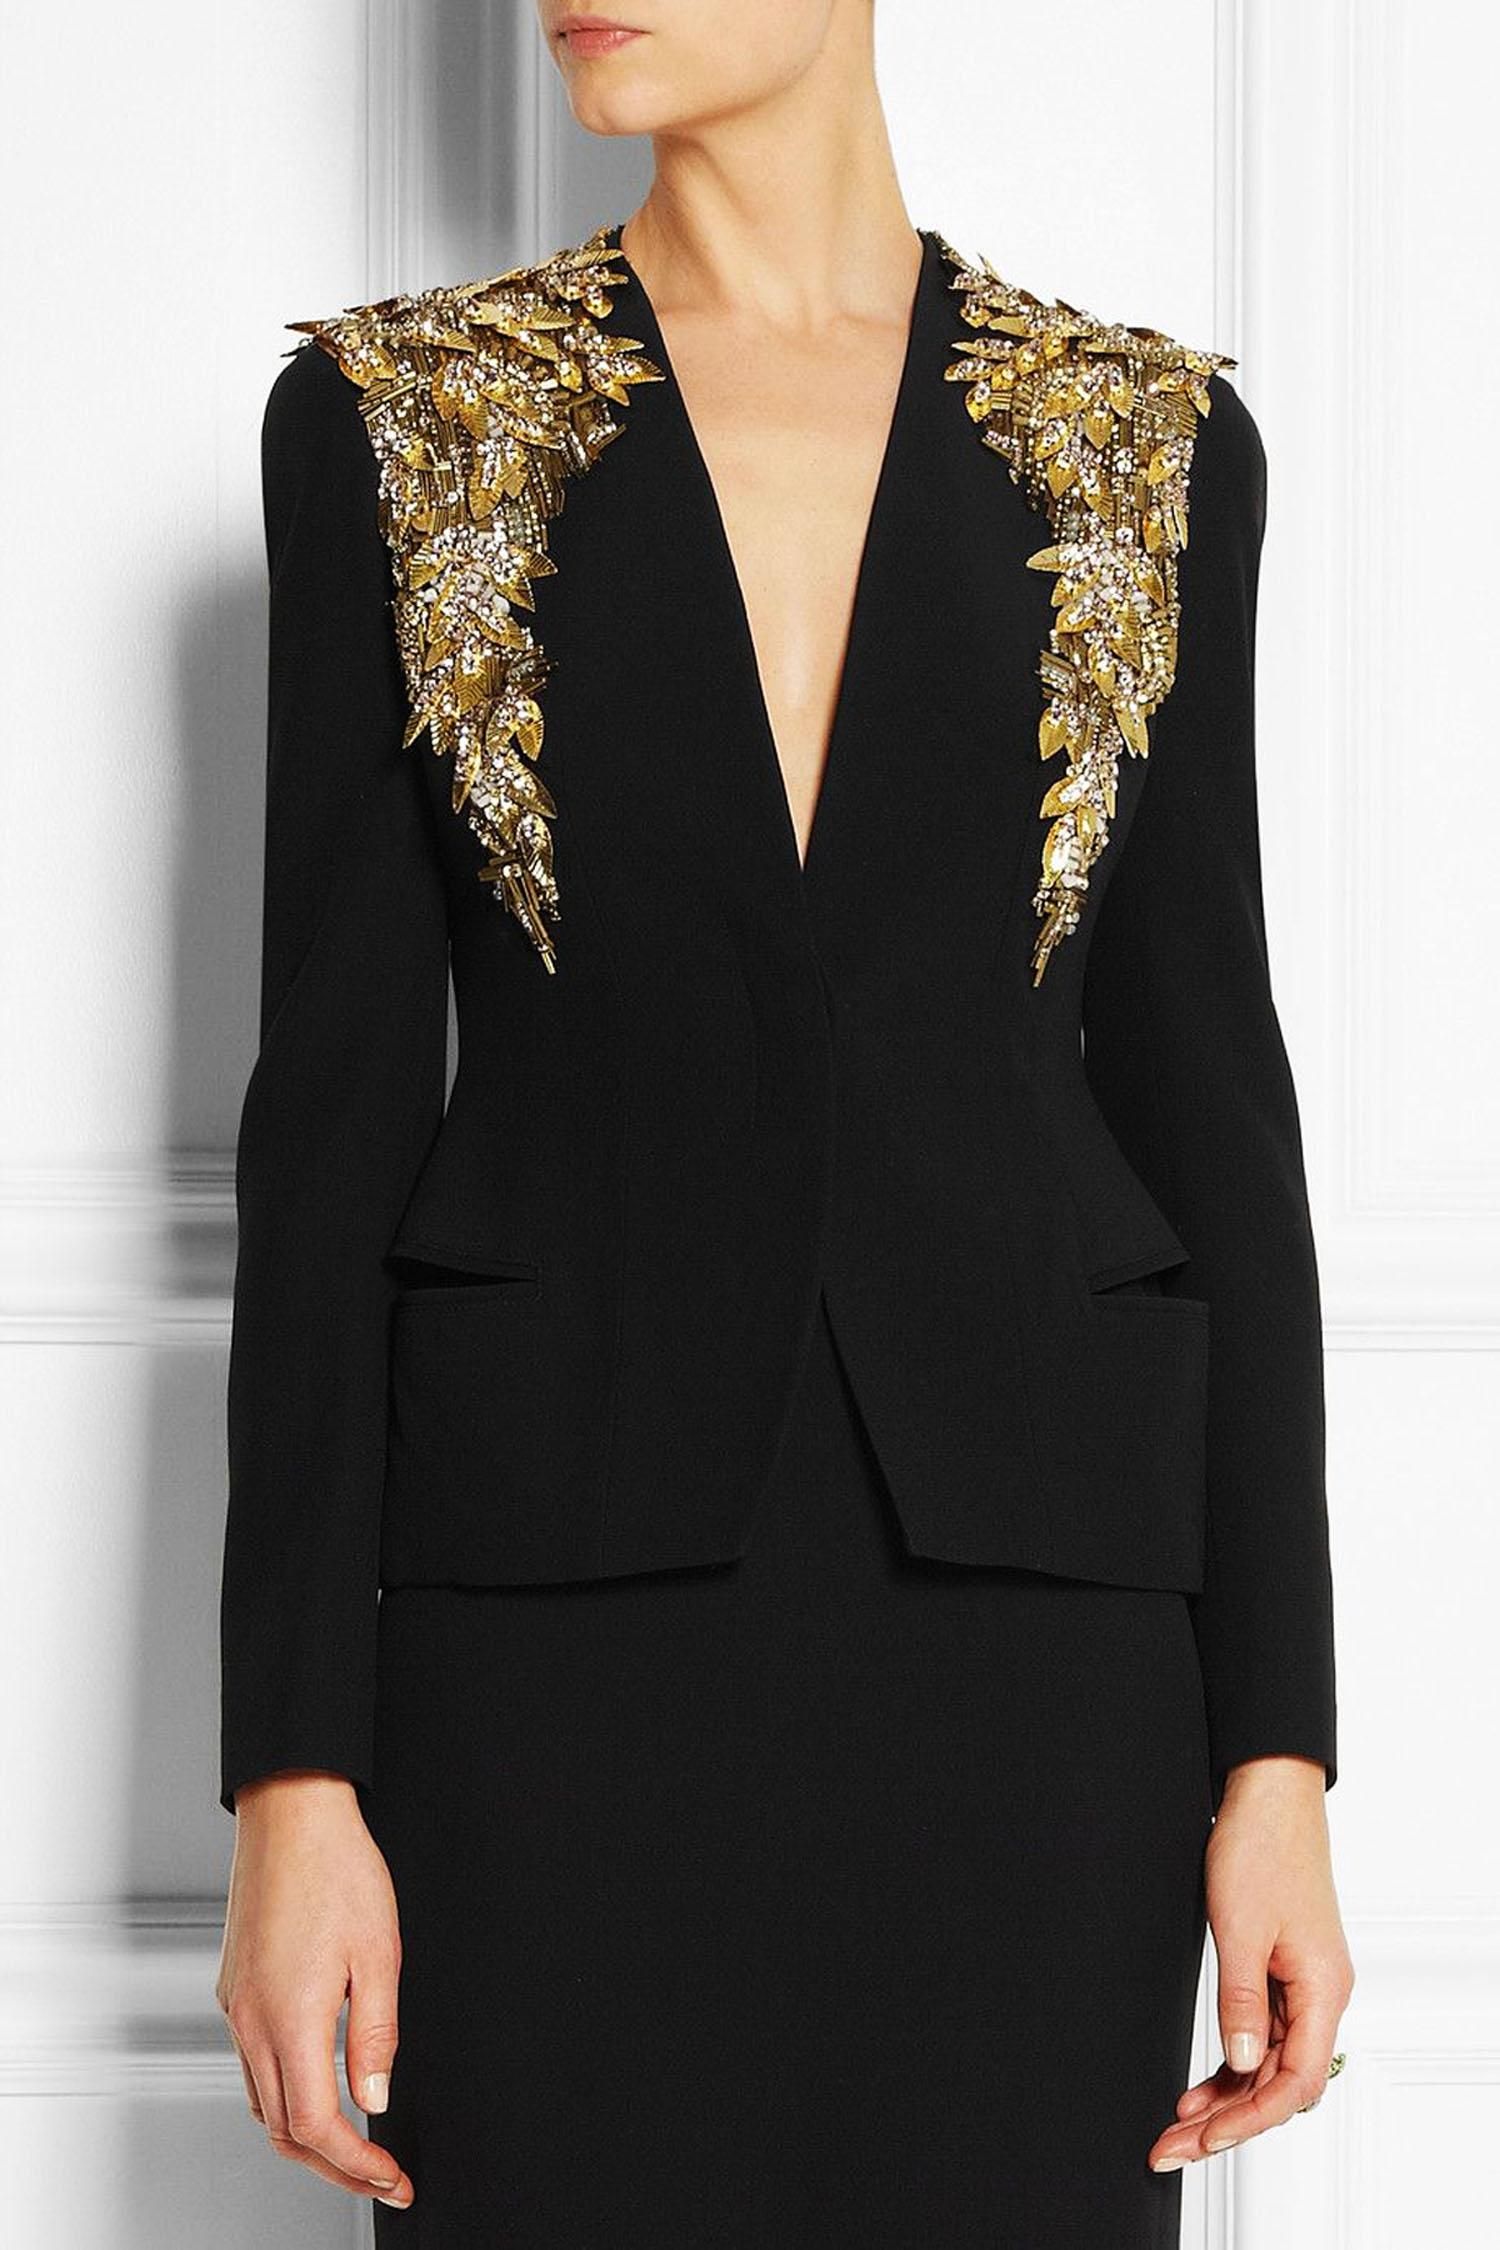 NWT Alexander McQueen Black Crepe Embellished Jacket
S/S 2014 Collection.
Italian size 44
Black mid-weight crepe. Copper sequins. Gold, clear and opaque beads, pink and honey crystals. Gold - tone leaf-shaped sequins. Welt pockets. Fully lined.